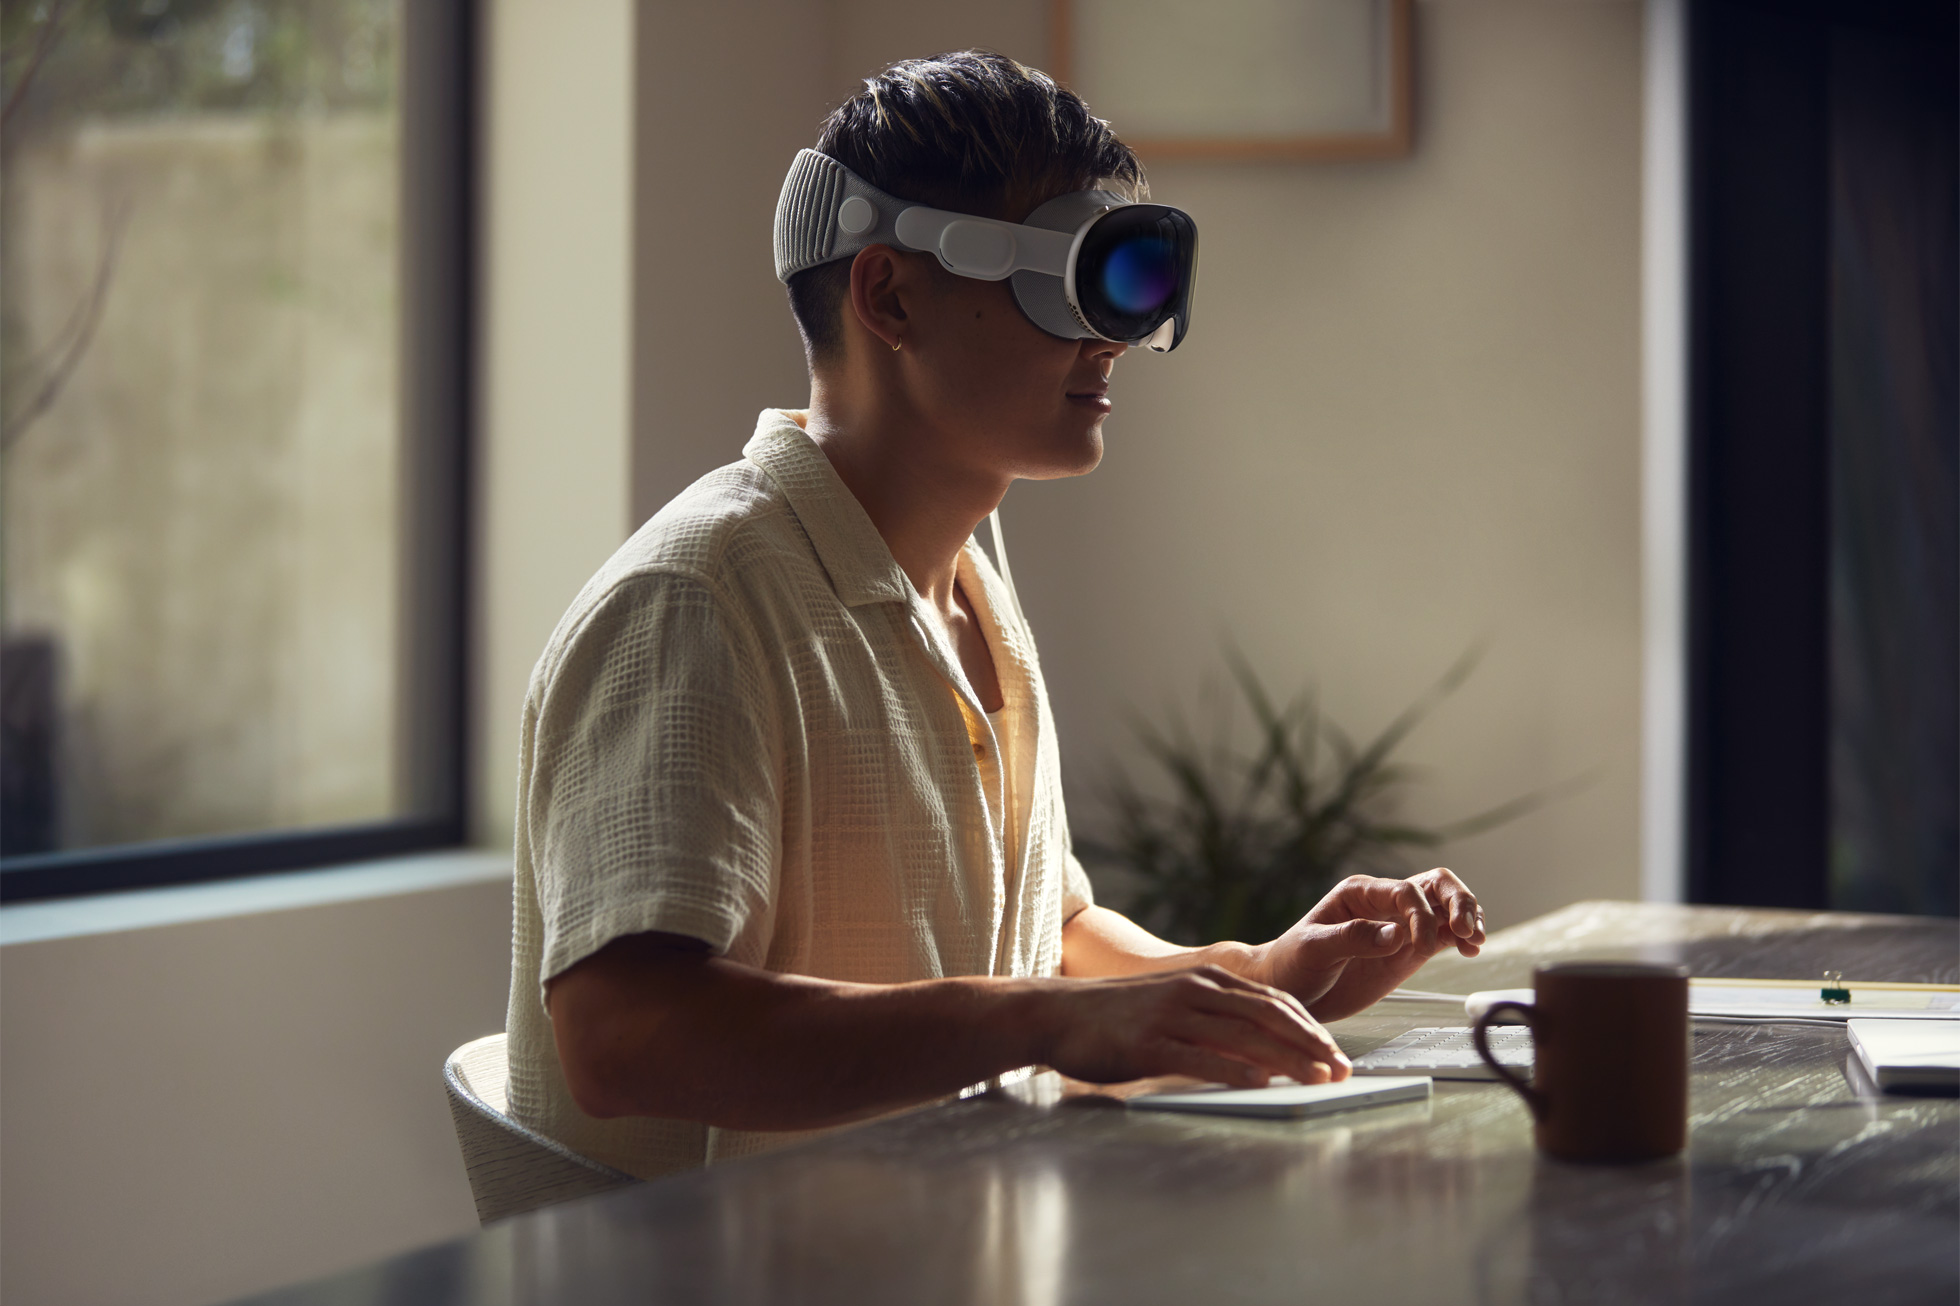 Man works while using Apple Vision Pro headset